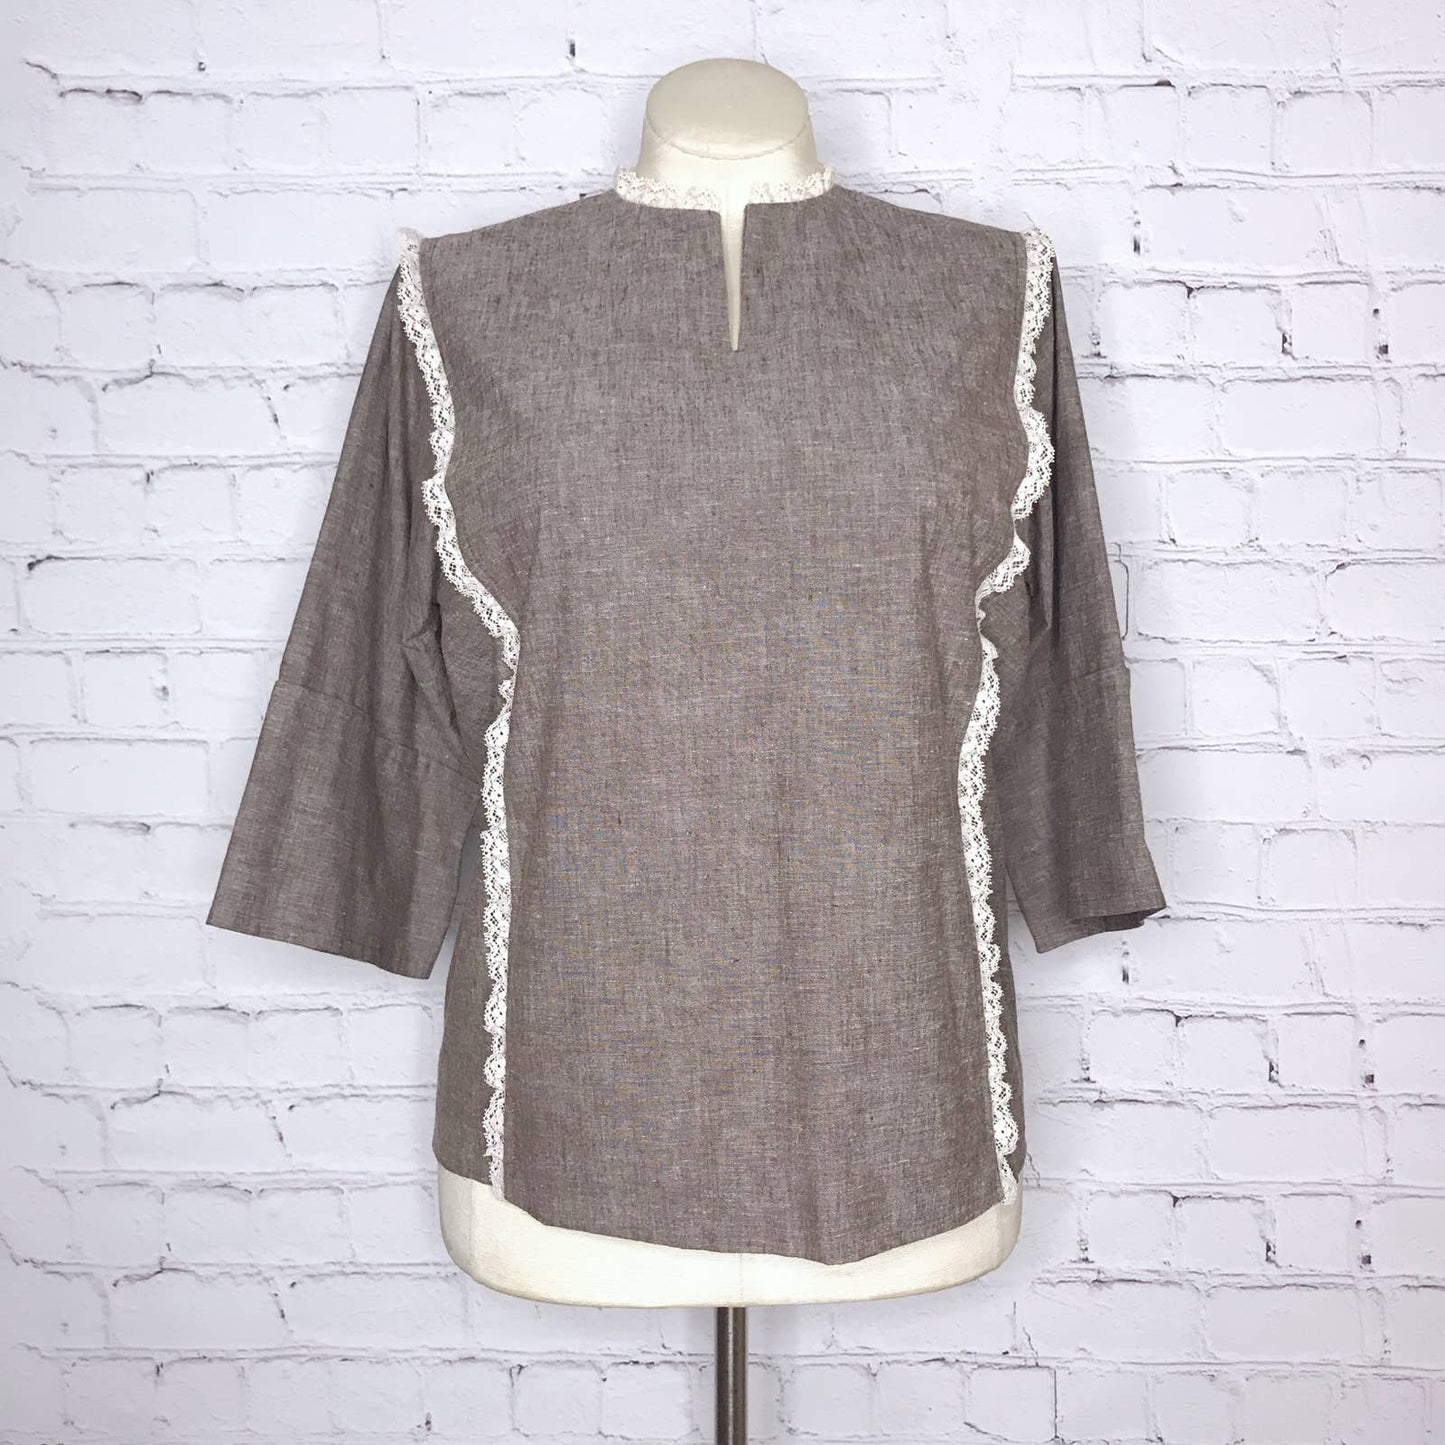 Vintage 70s Earthy Hippy Tunic Blouse Pockets Lace Trim Hand Made Size M-L